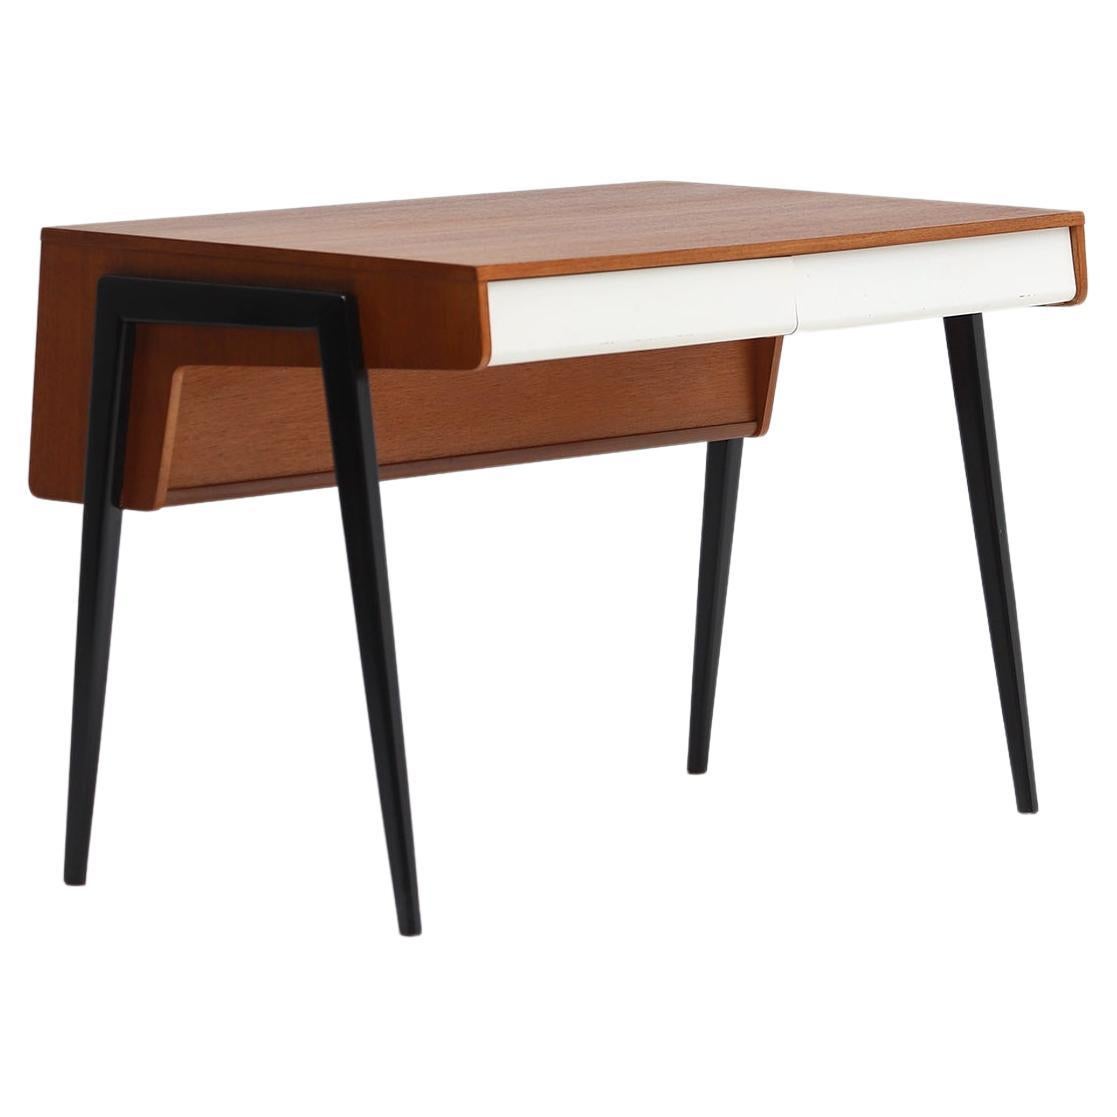 Mid-Century Modern Writing Desk Manufactured by Everest in the 1950s